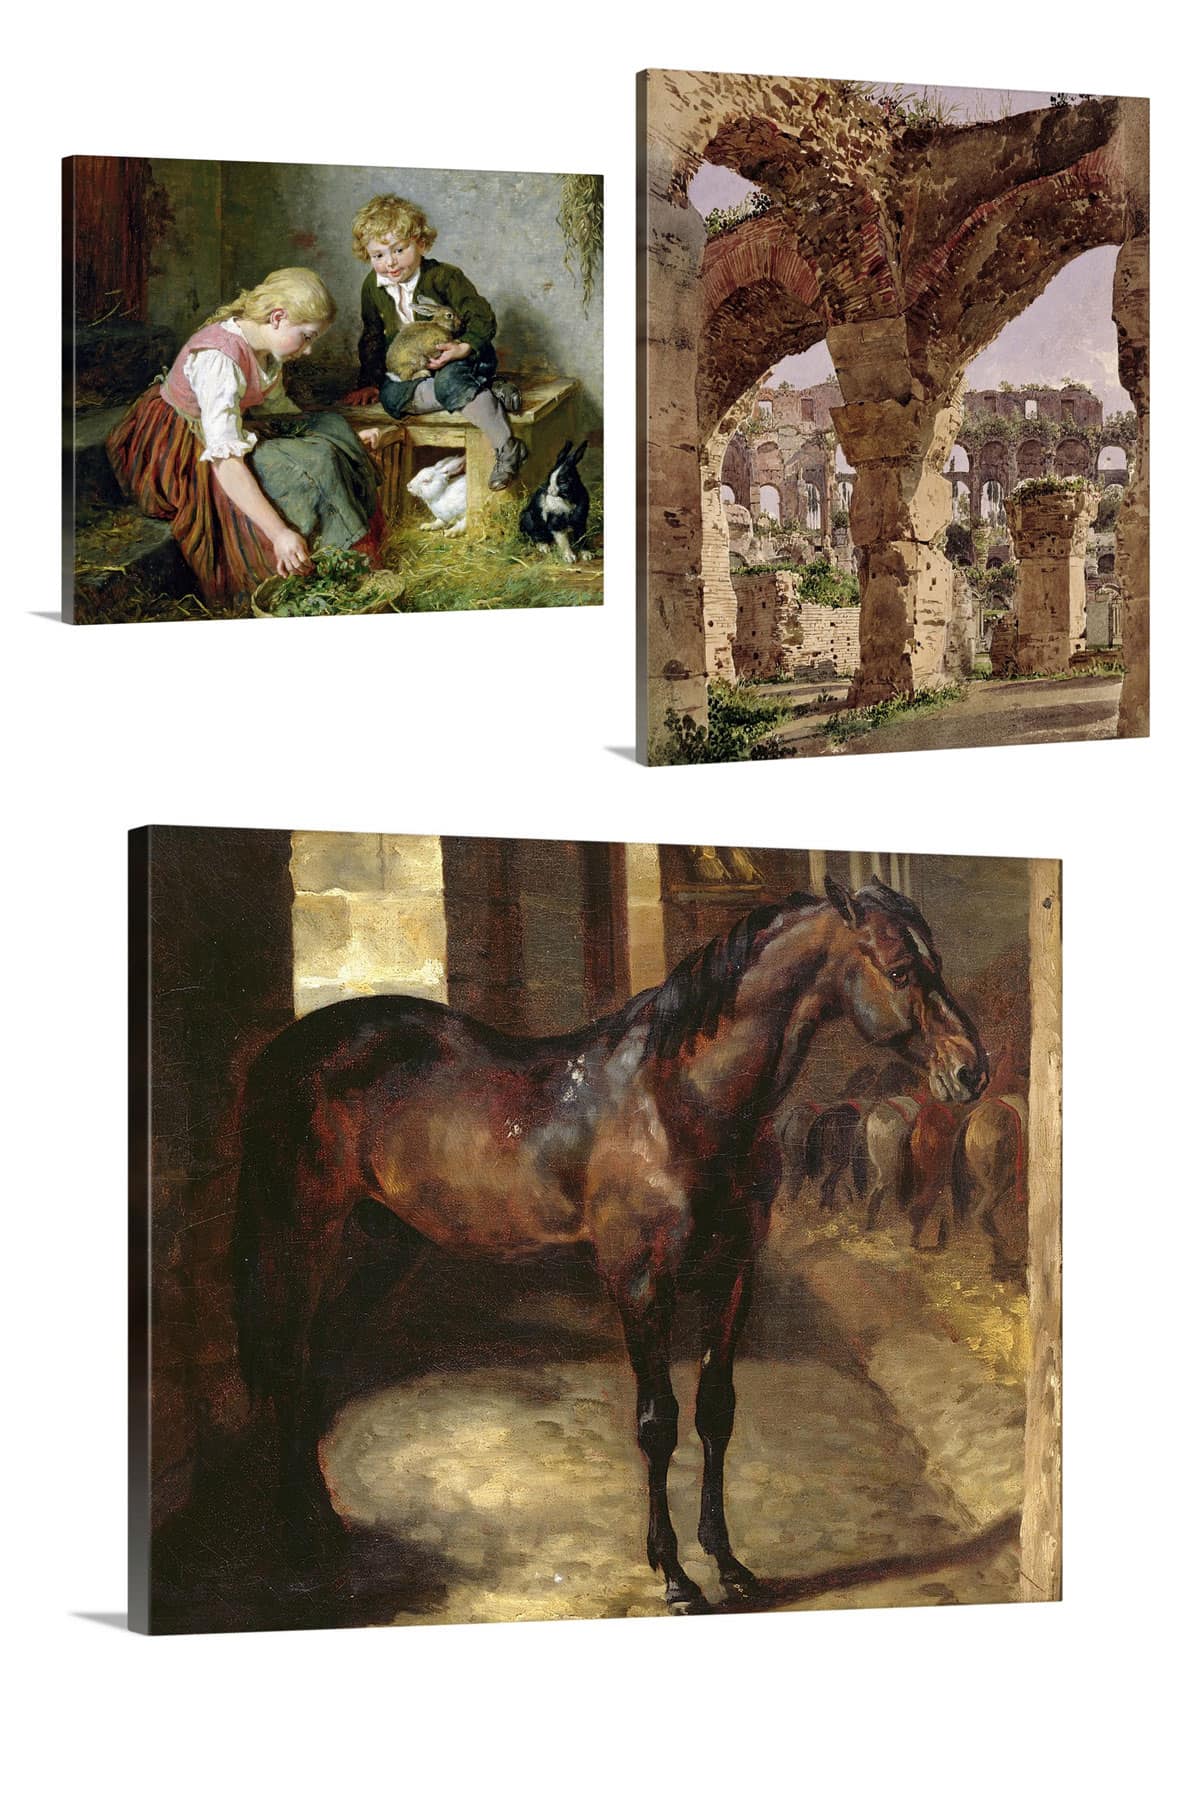 collage showing three different works of wall art